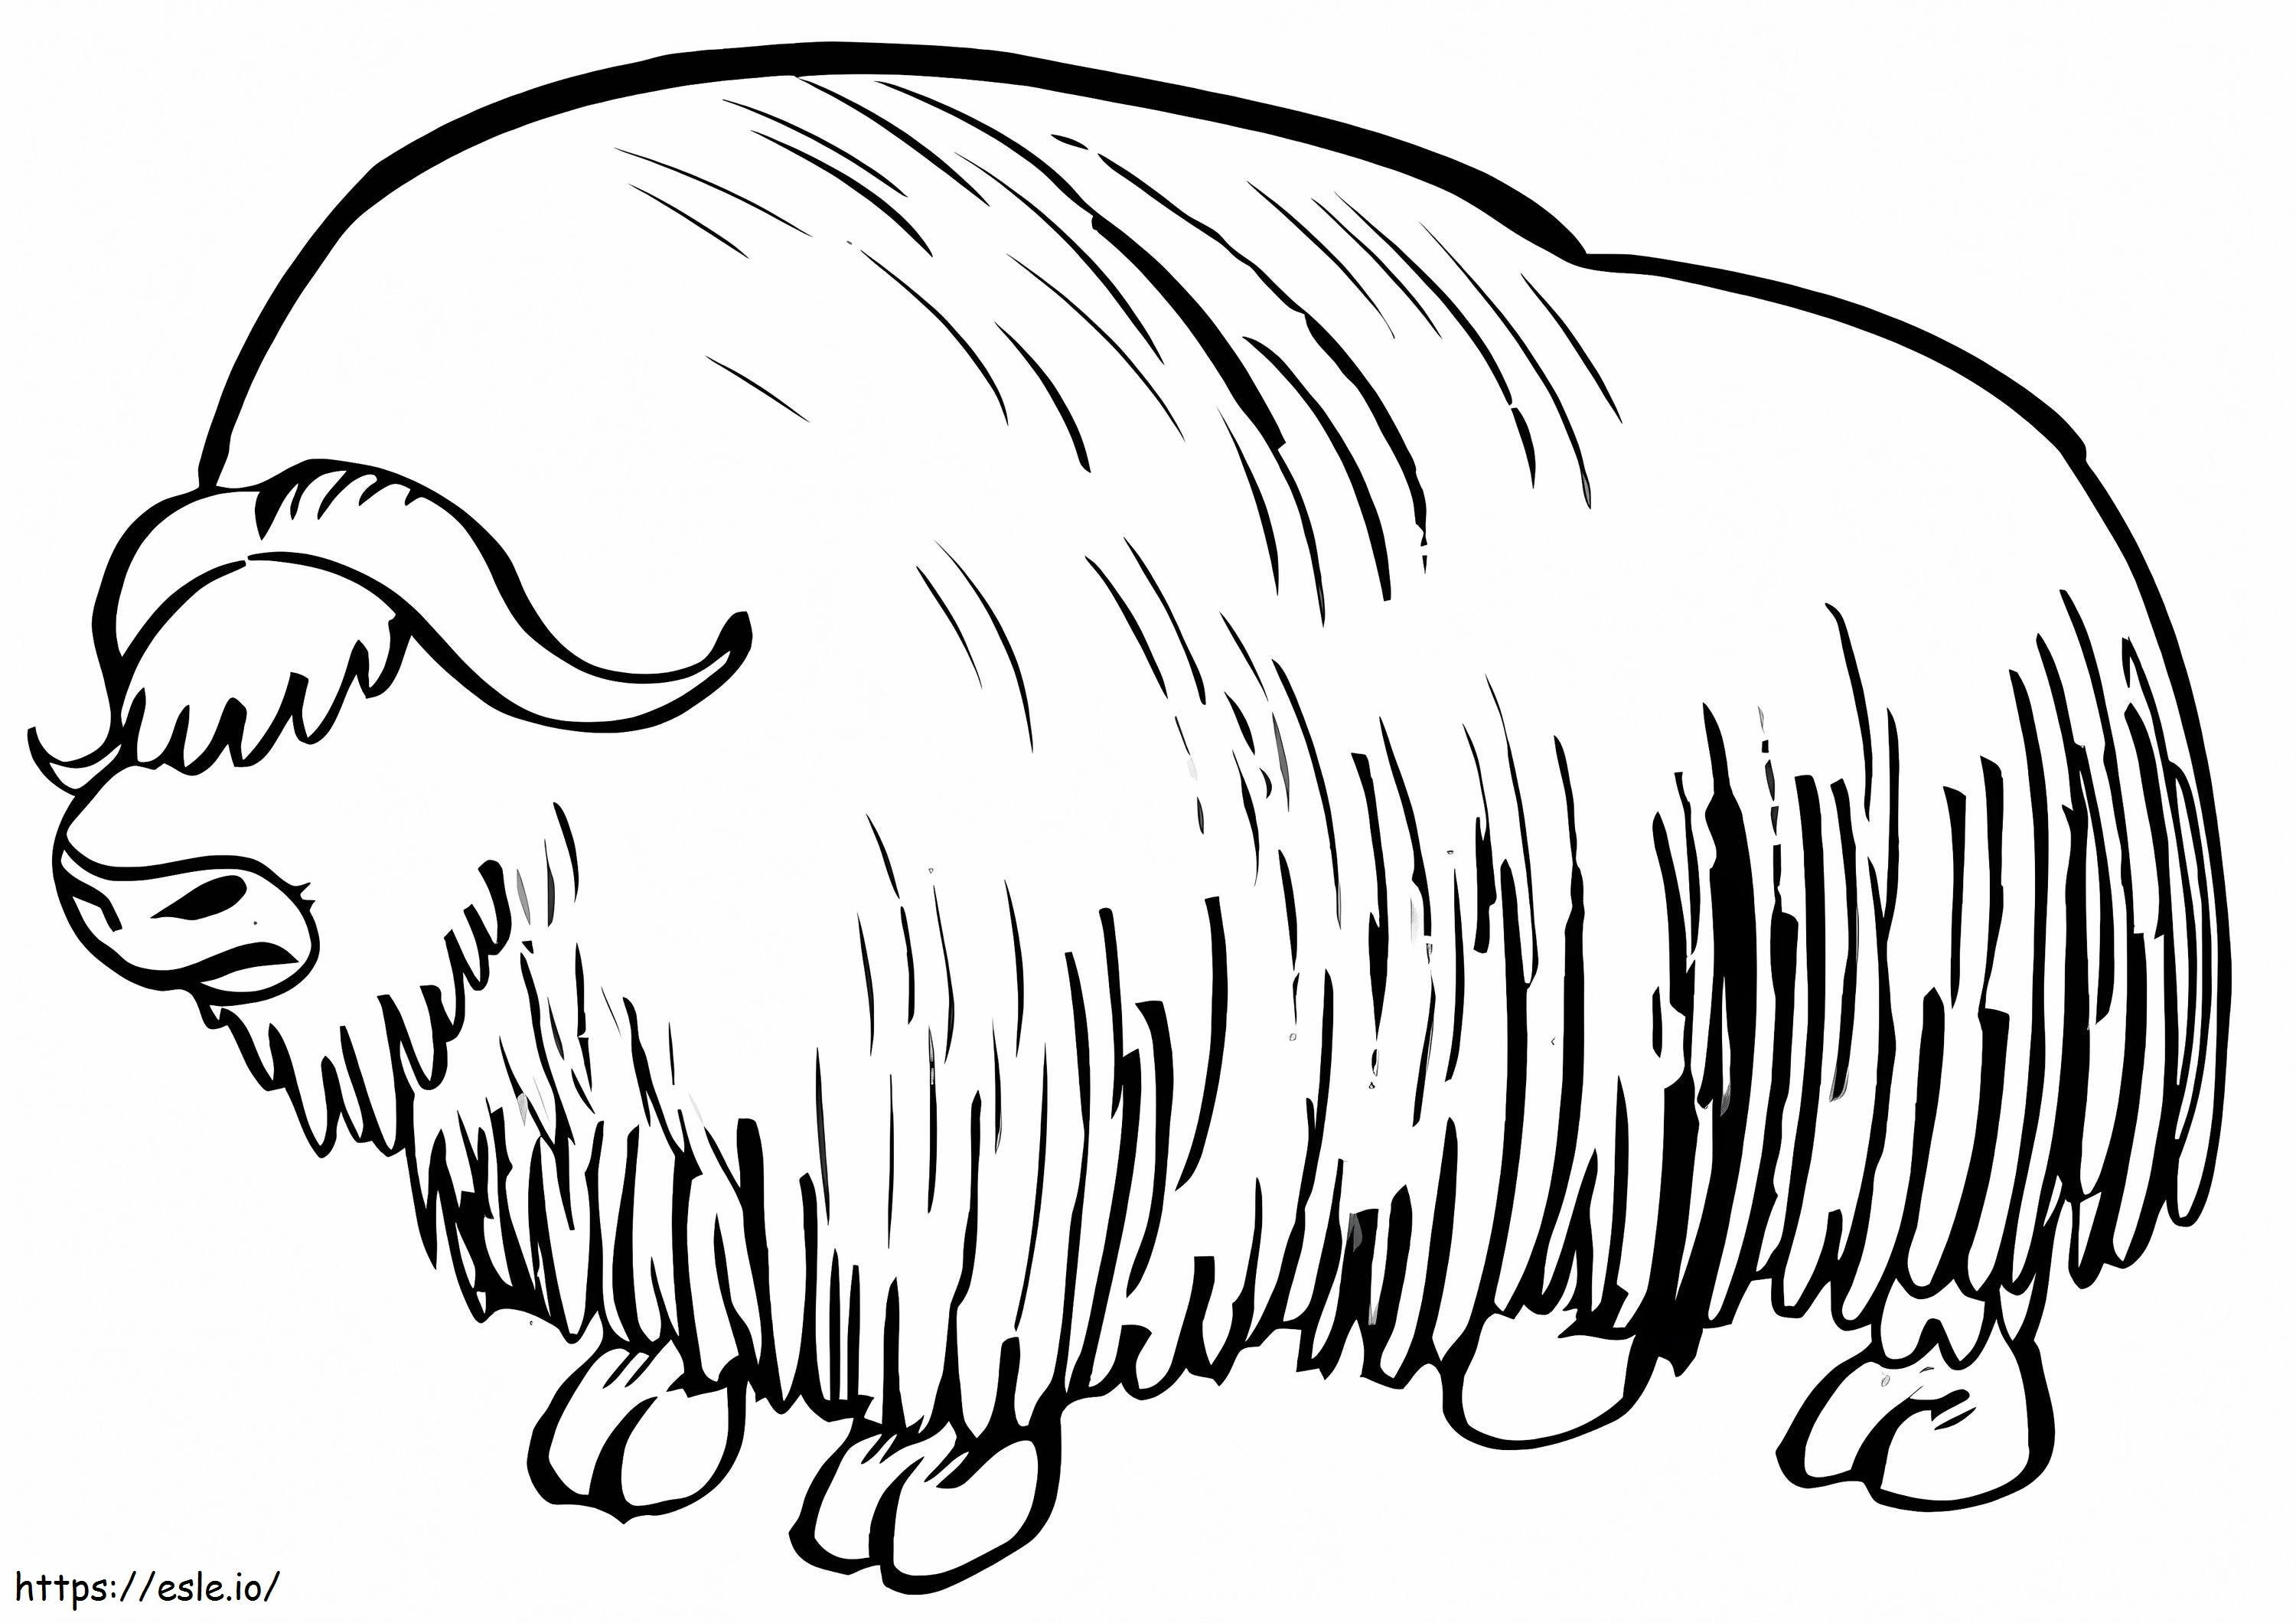 Giant Bison 1 coloring page